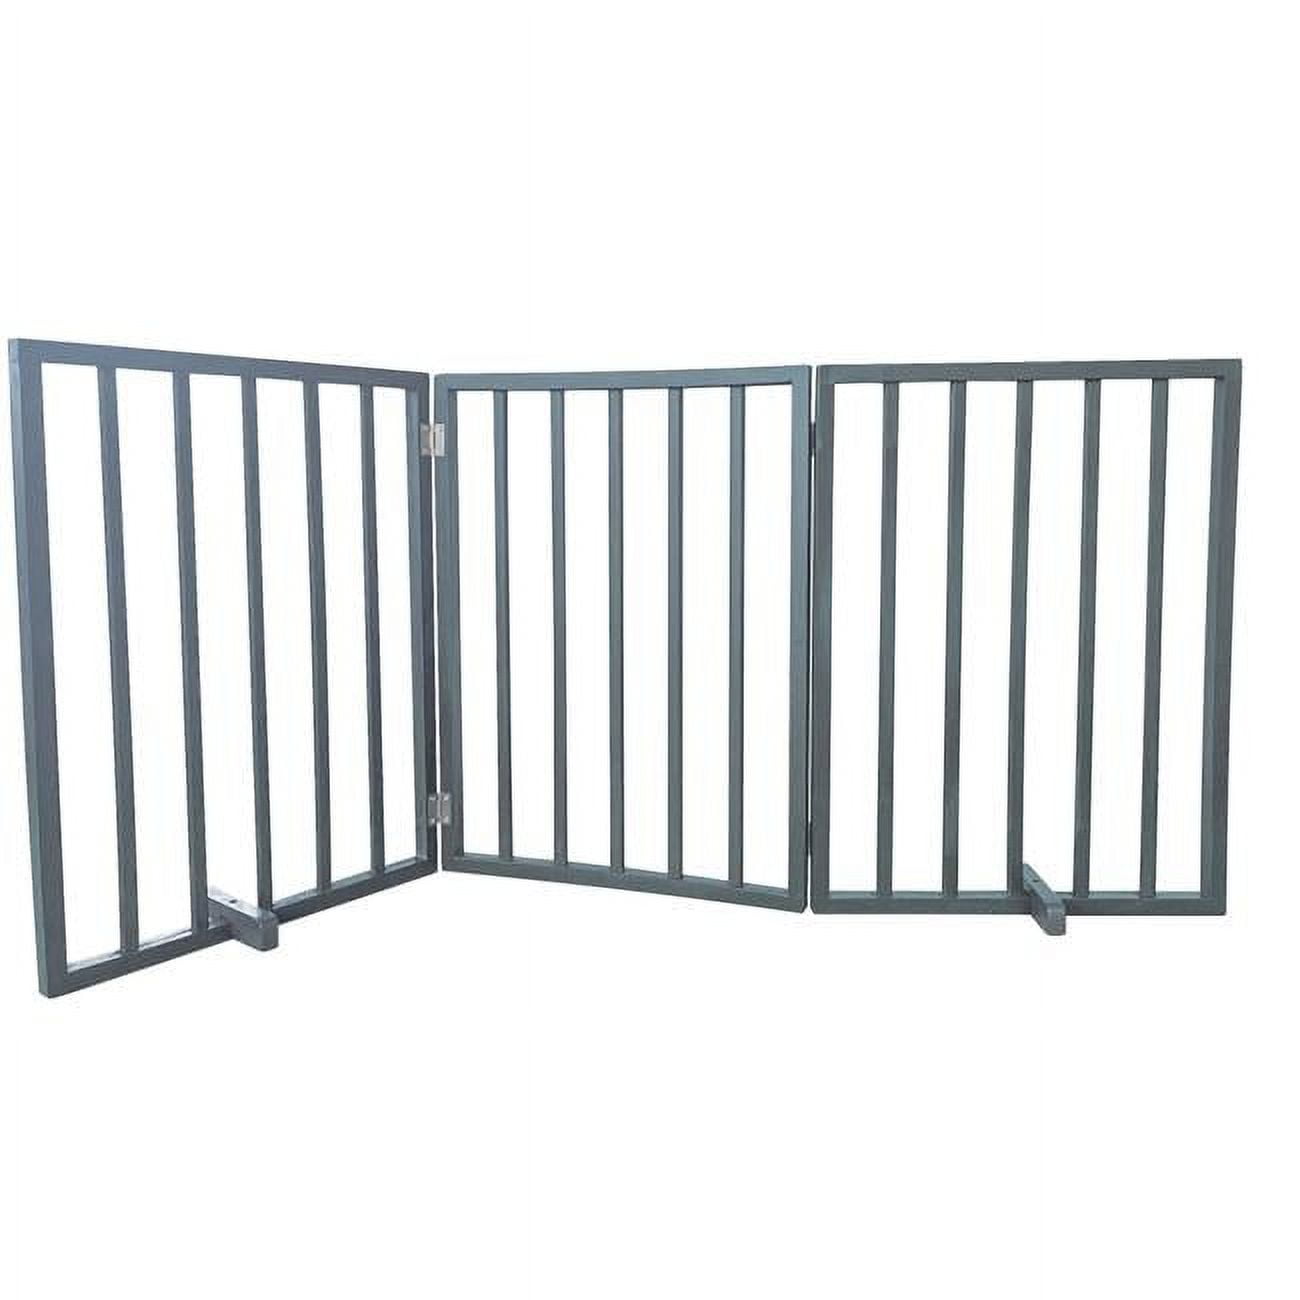 Picture of AmeriHome WFPGG3 54 in. Freestanding 3-Panel Folding Wood Pet Gate - Grey